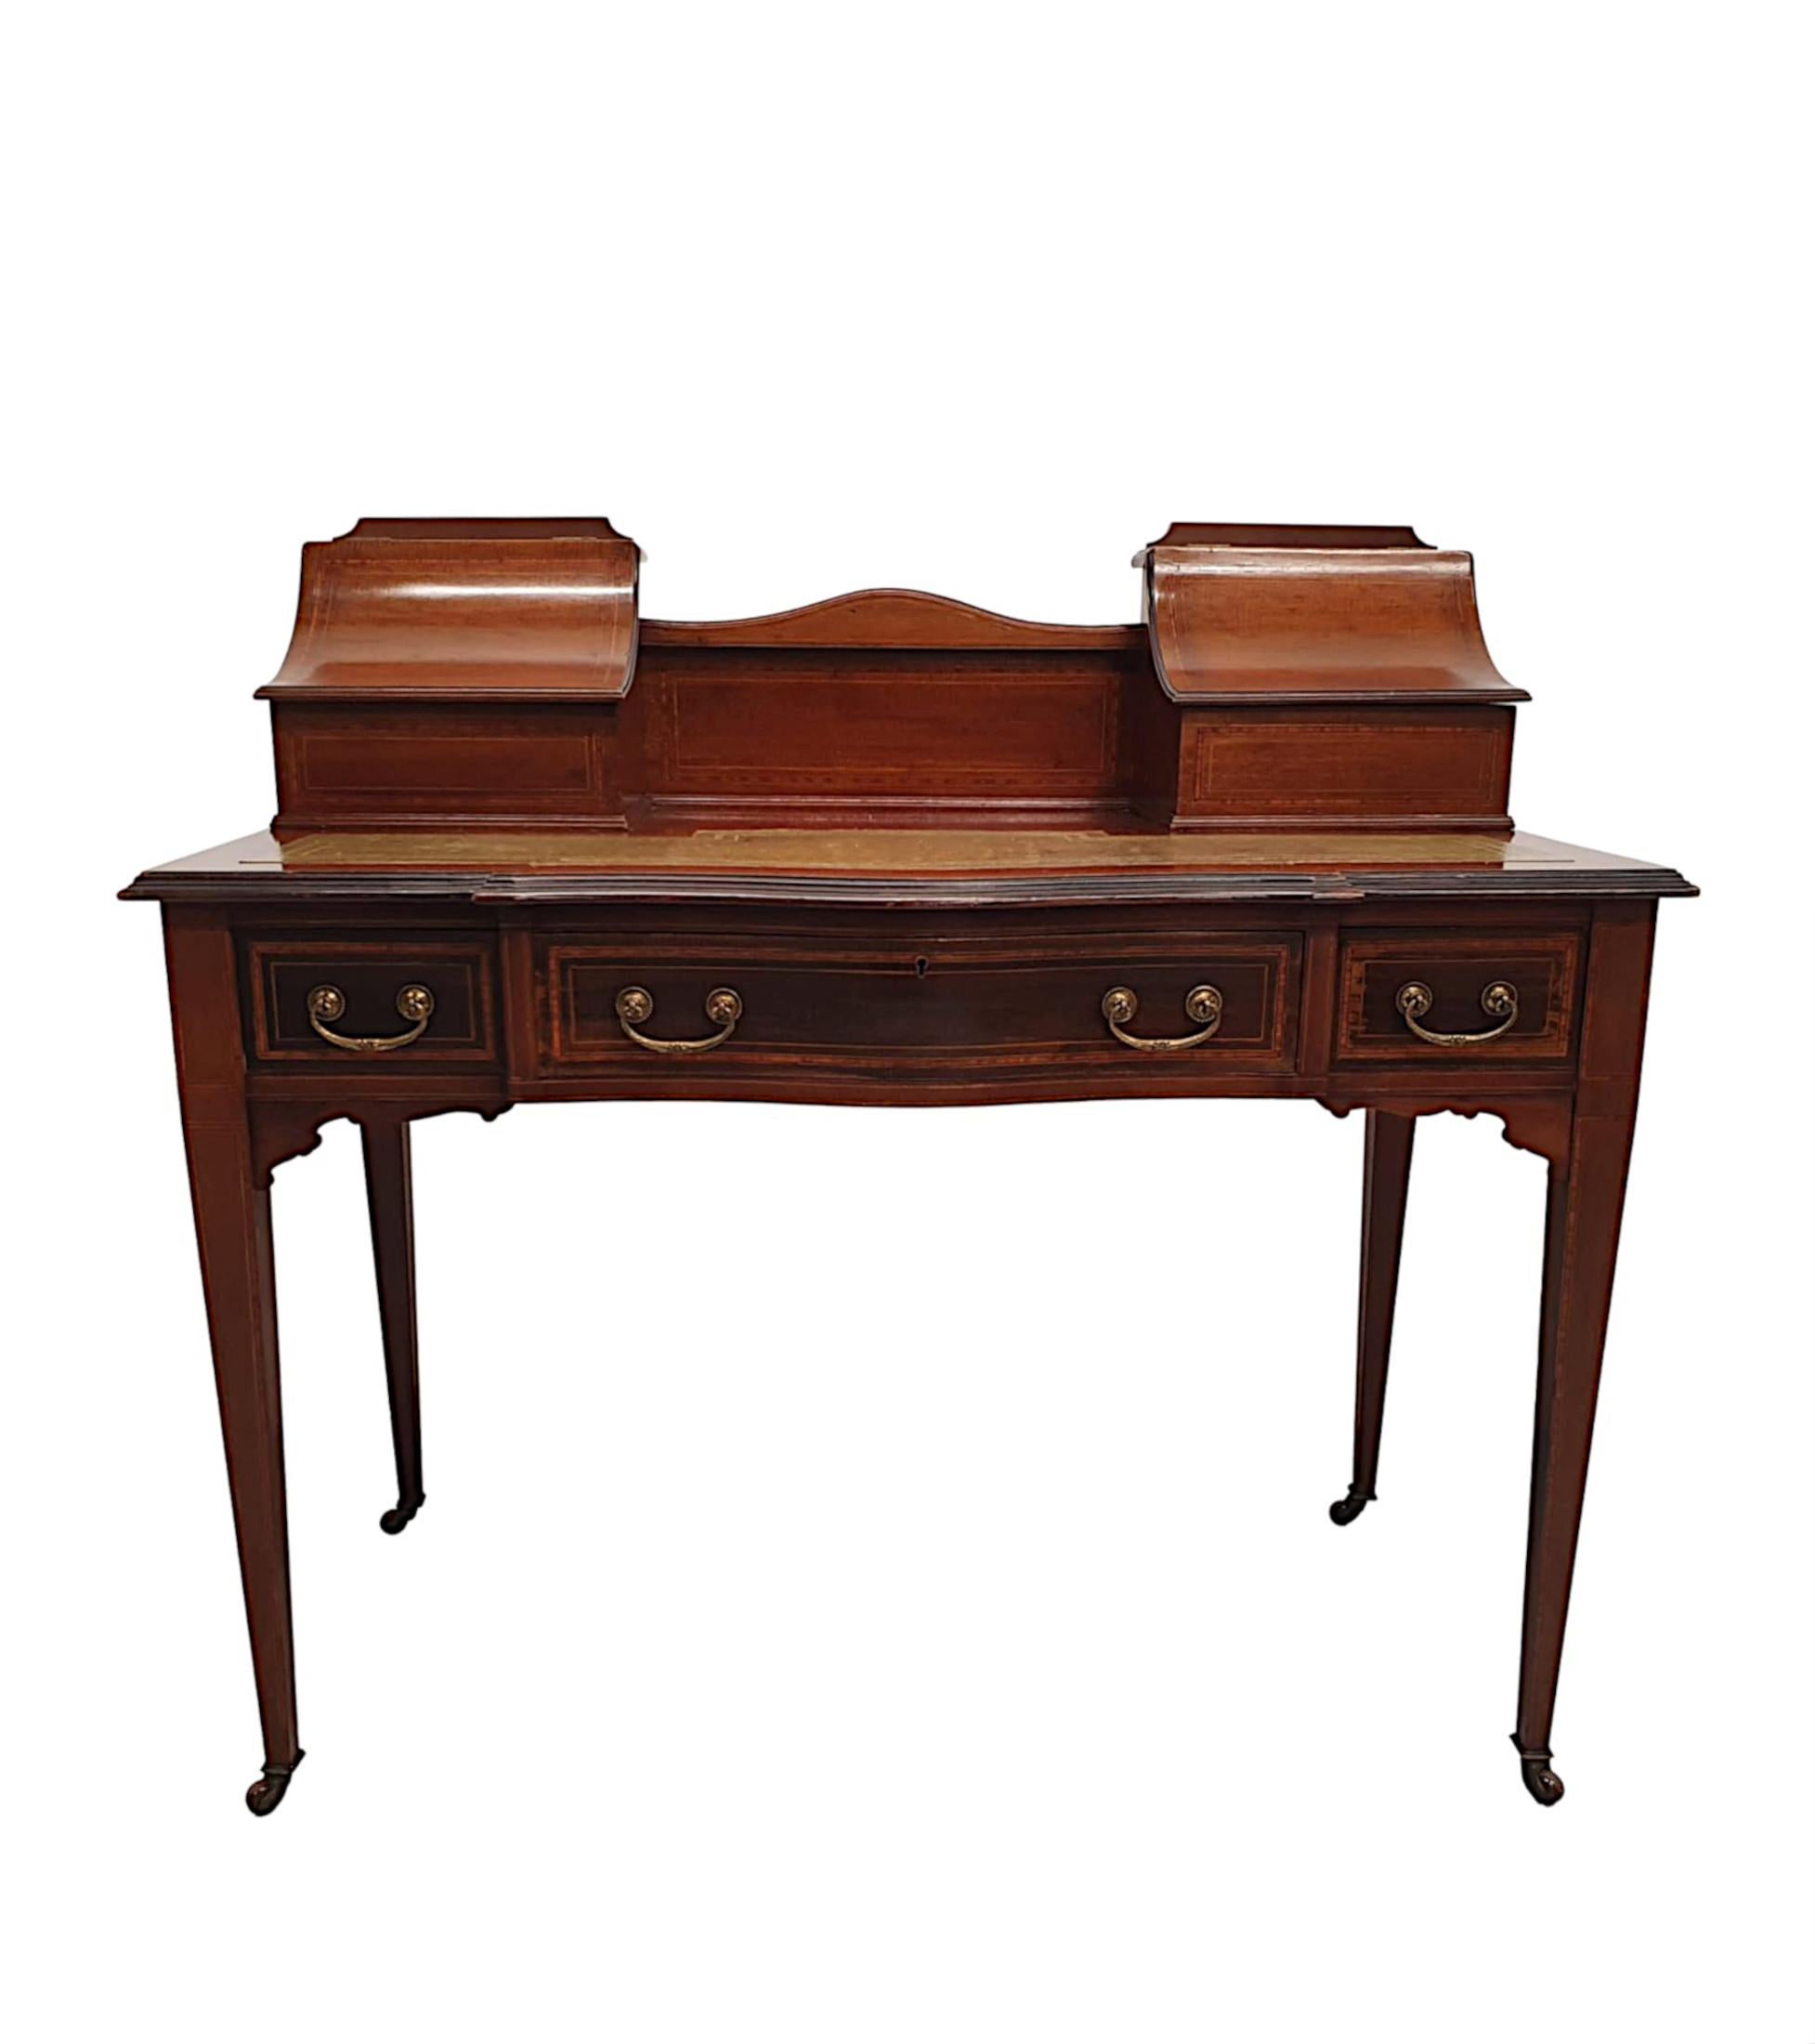 English Fabulous Edwardian Inlaid Desk in the Carlton House Style For Sale